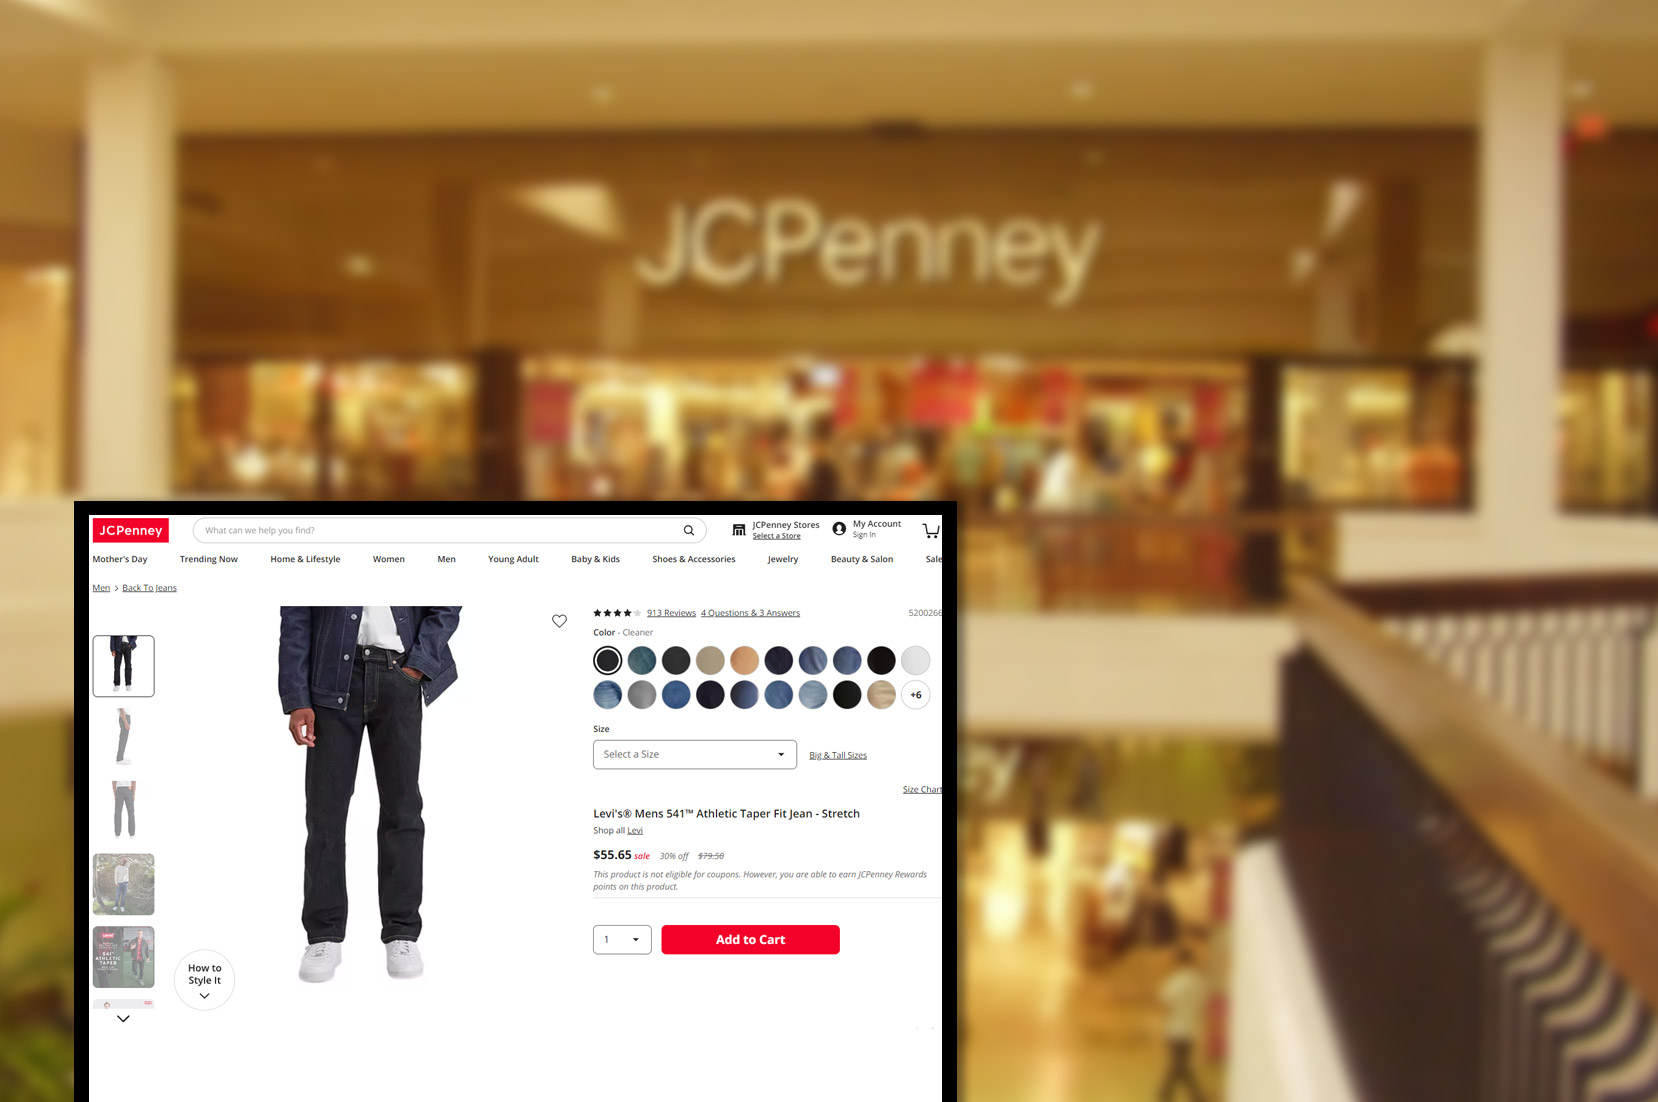 jcpenney-comproduct-pricing-information-and-image-scraping-services